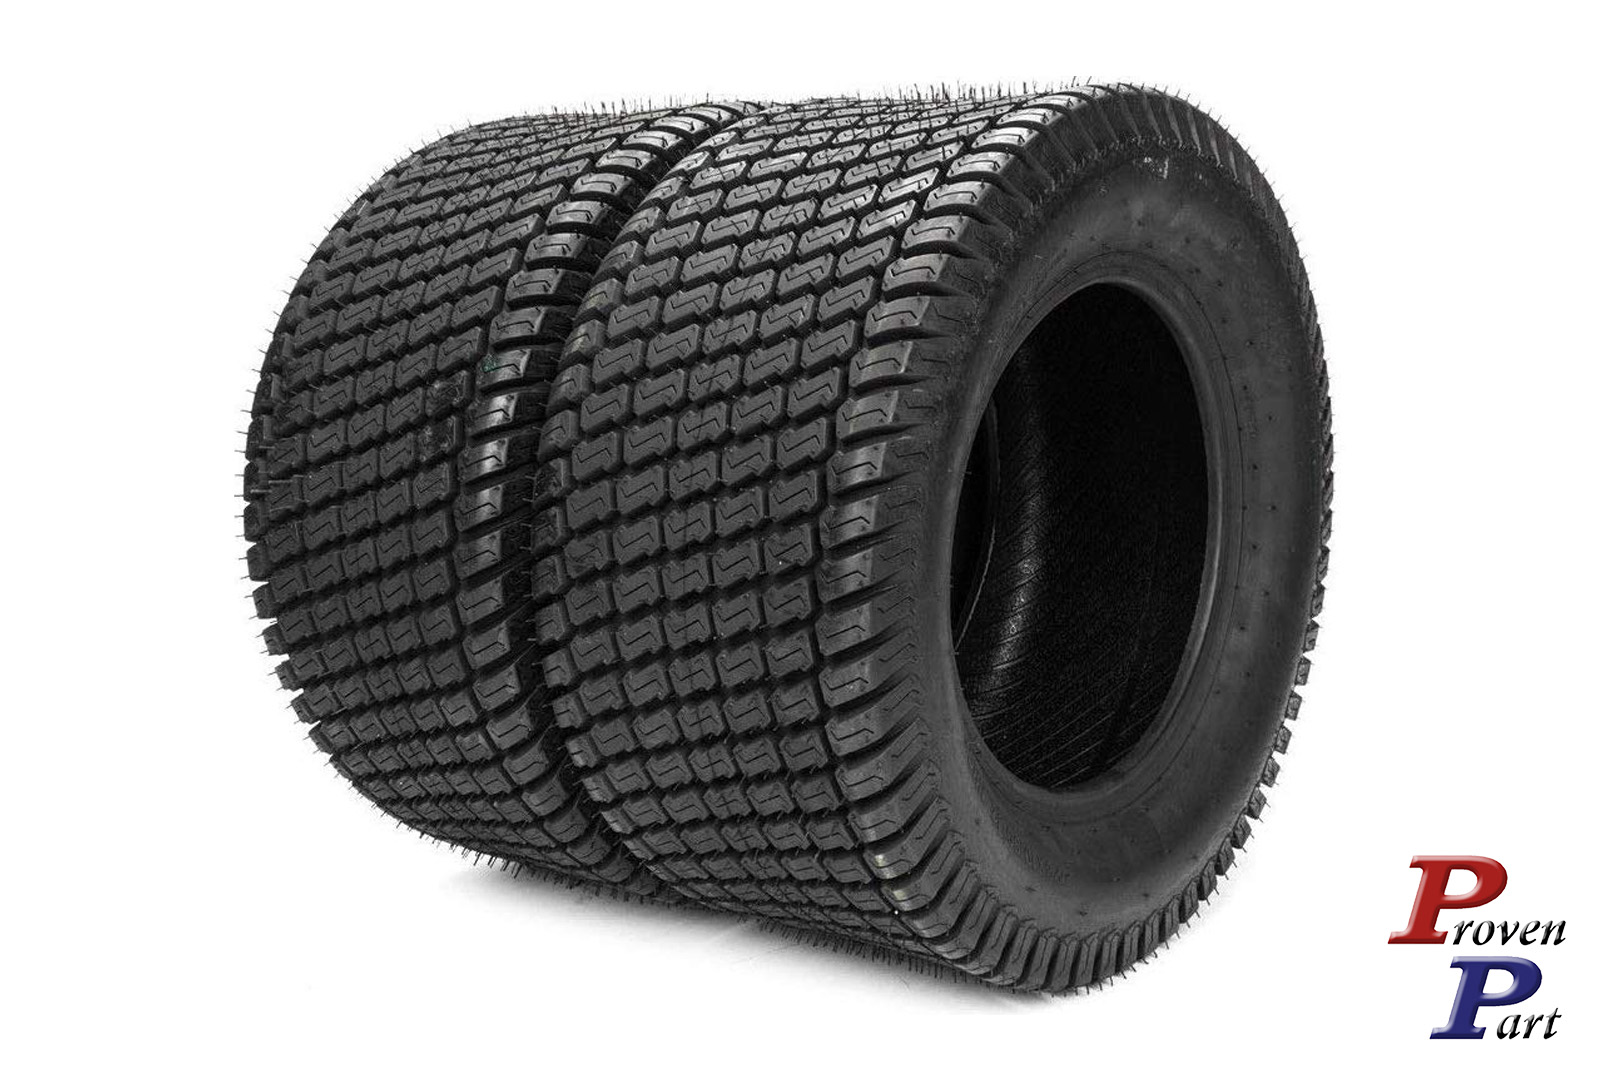 2 tubeless riding mower ProMaster tires 24X9.50-12 4 ply - Click Image to Close